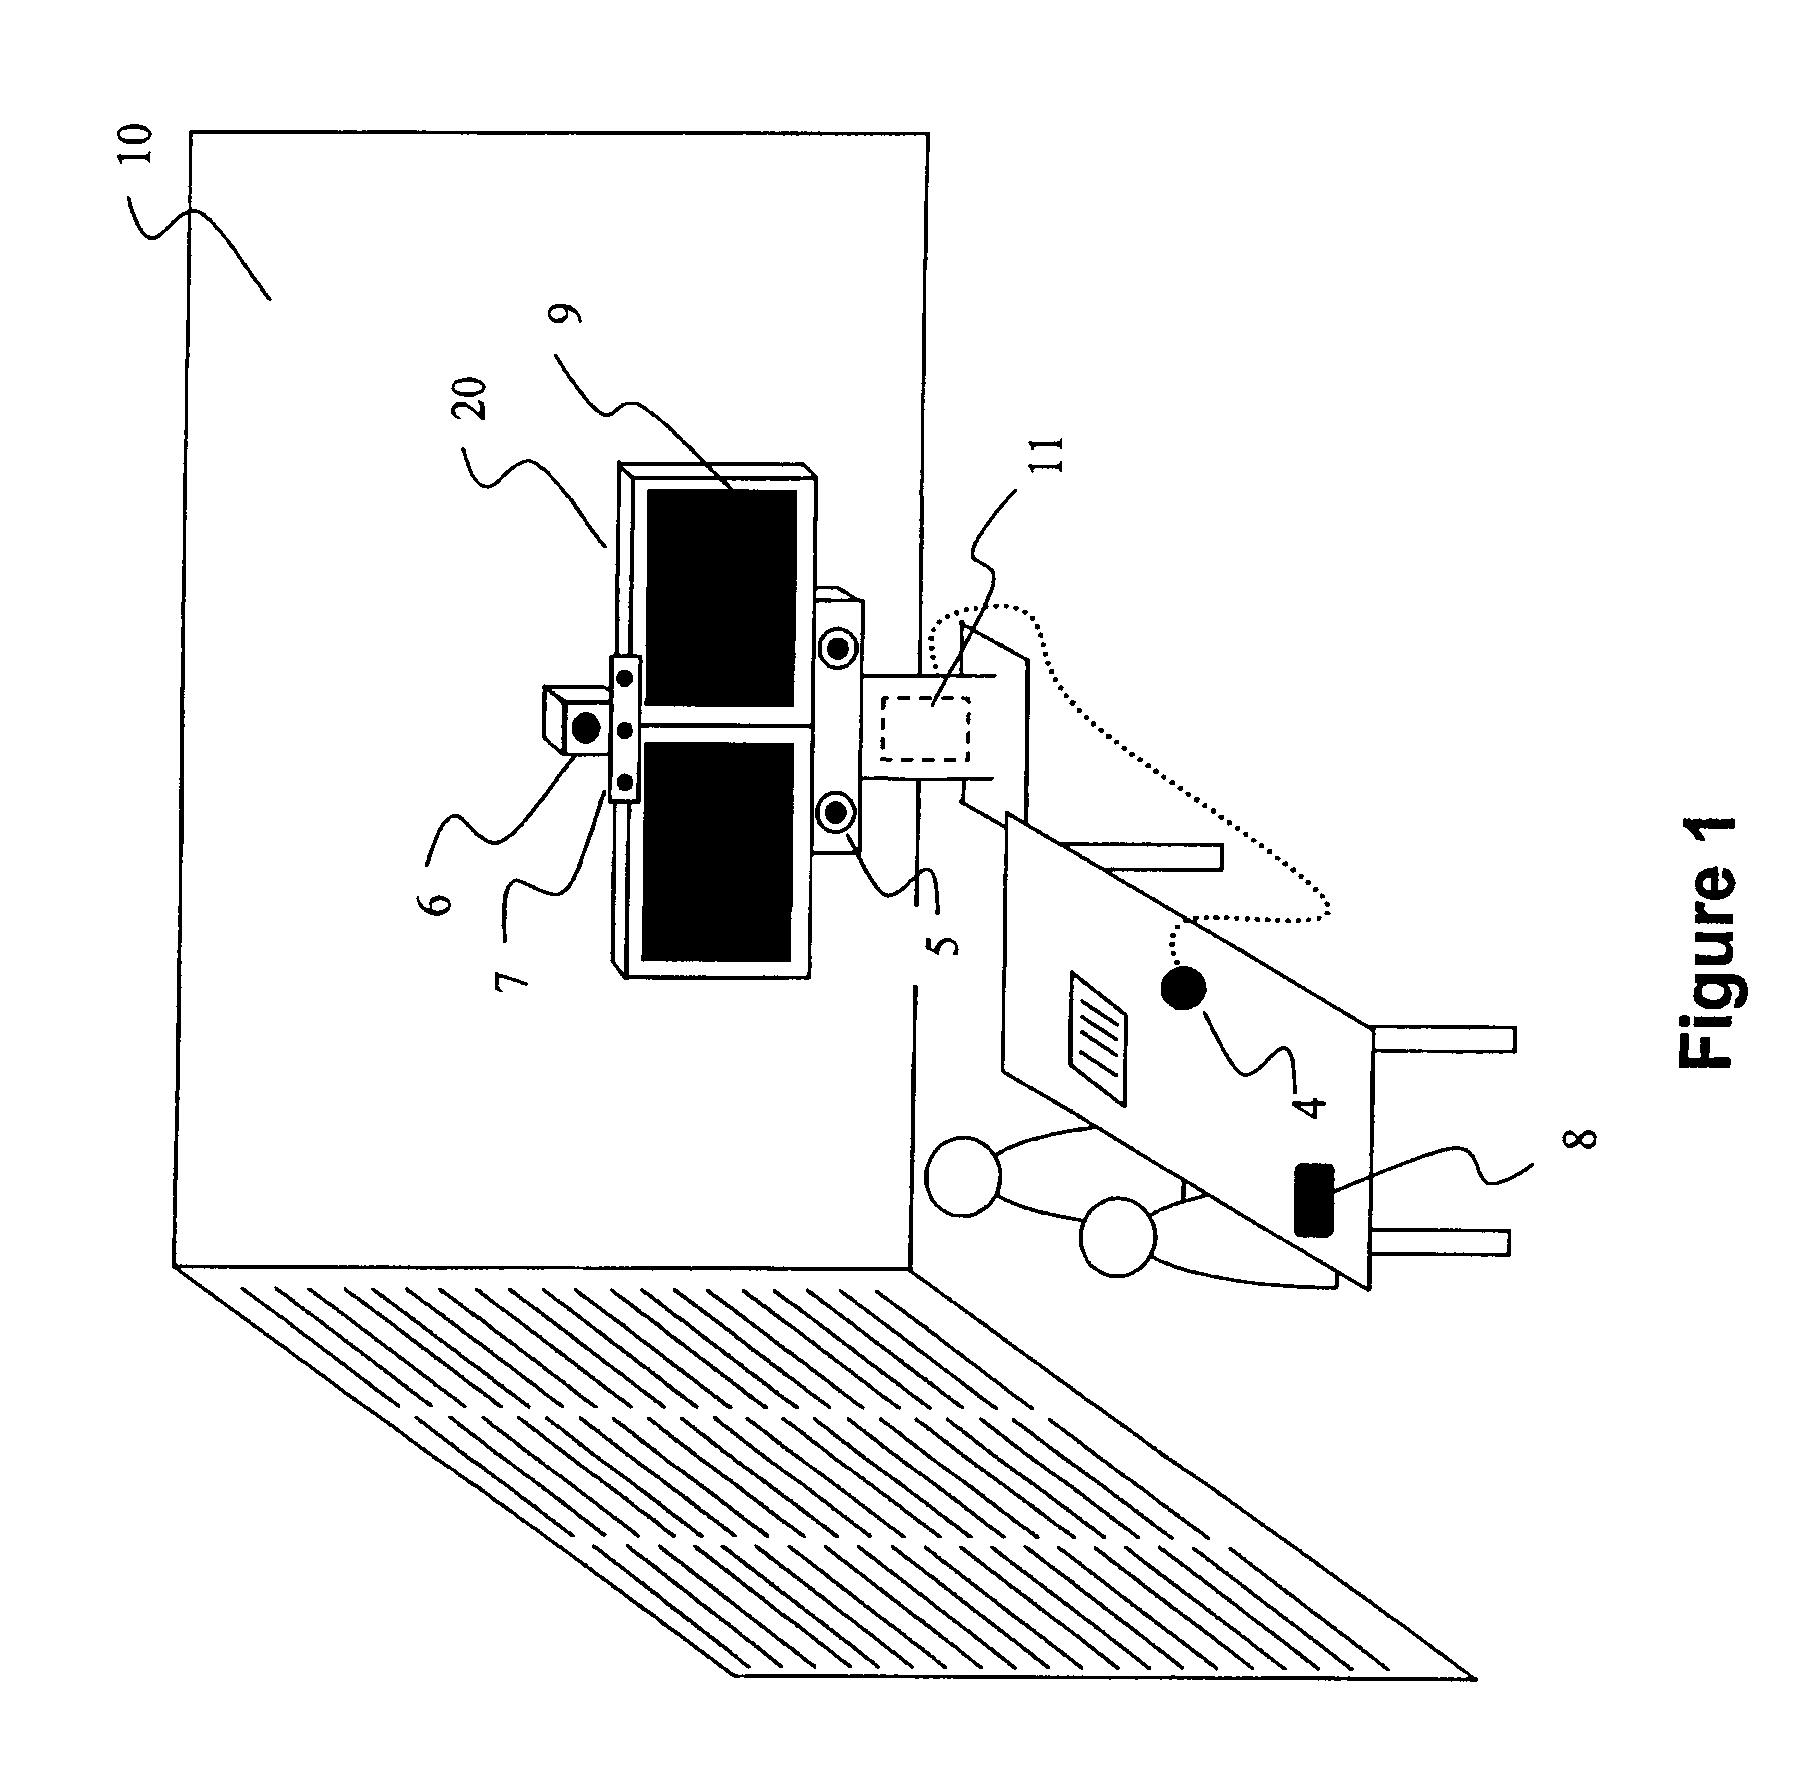 Method and system for automatic camera control